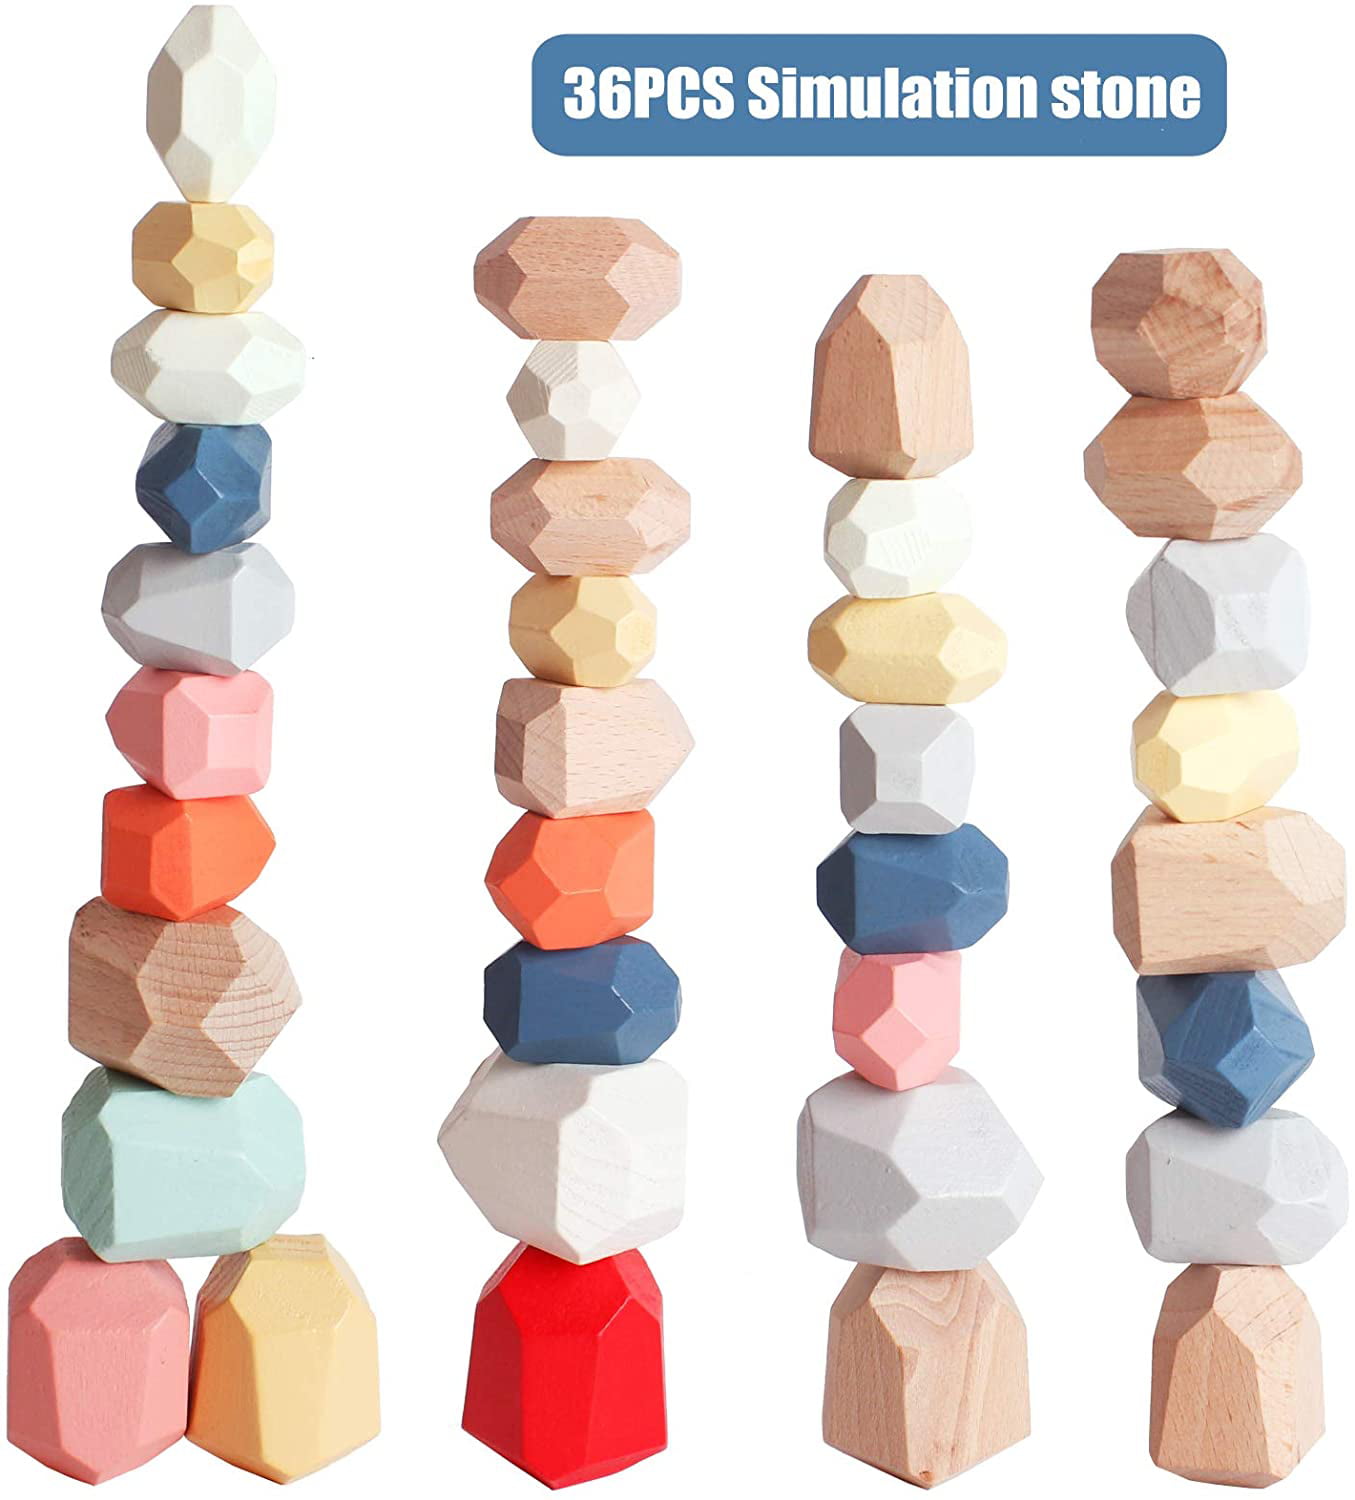 BESTAMTOY Wooden Sorting Stacking Balancing Stone Rocks Educational Preschool Learning Toys Large Small Building Blocks Game Stones Lightweight Puzzle Set for Kids 3 Years Old 